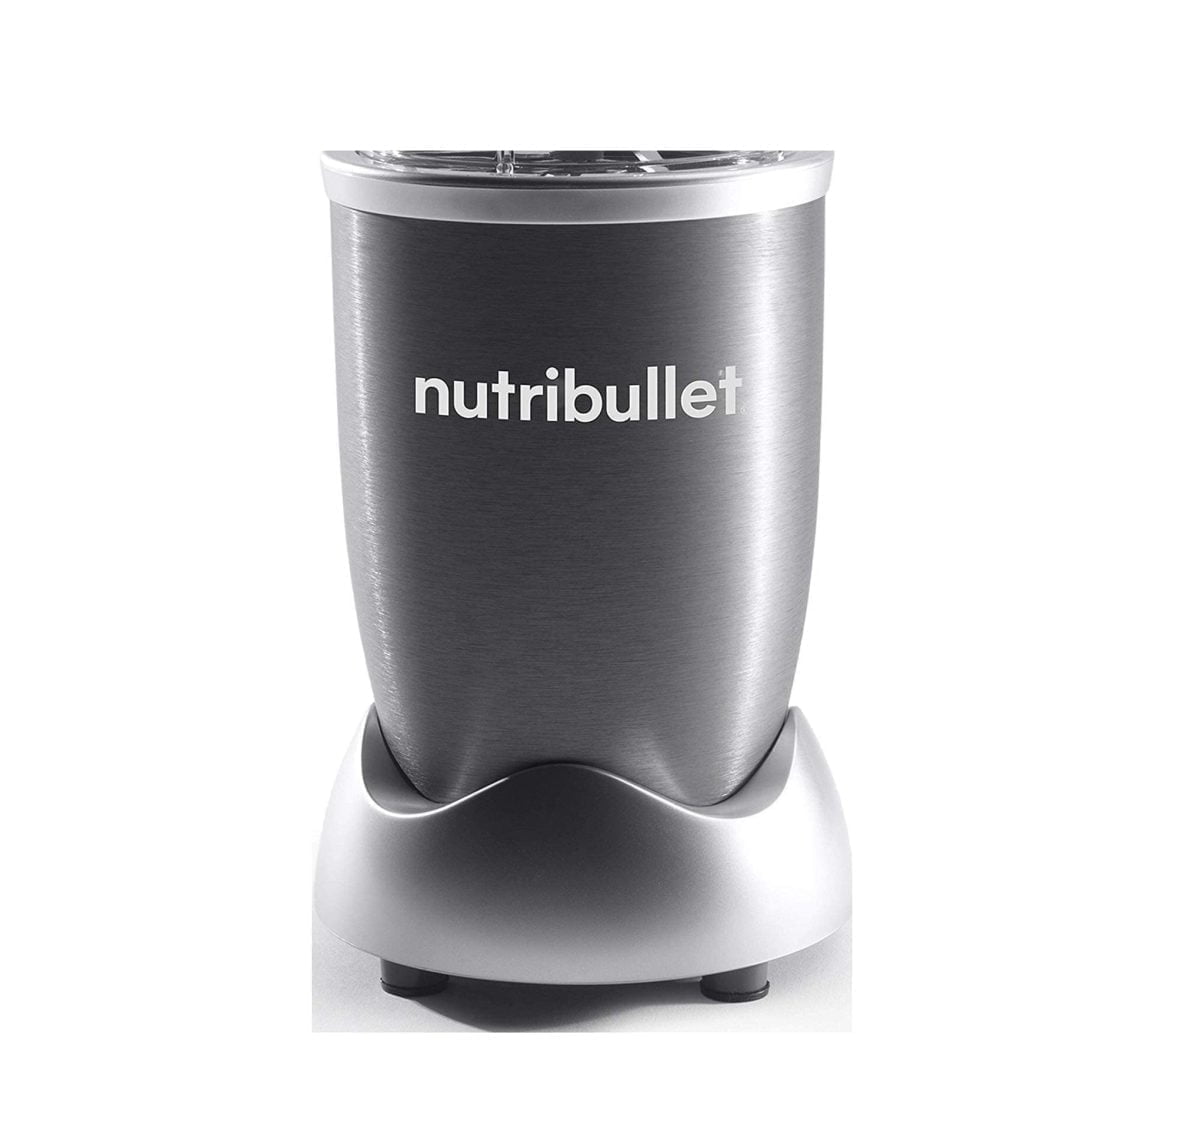 71D2Ml1Rbdl. Ac Sl1500 &Lt;Ul Class=&Quot;A-Unordered-List A-Vertical A-Spacing-Mini&Quot;&Gt; &Lt;Li&Gt;&Lt;Span Class=&Quot;A-List-Item&Quot;&Gt;Meet The Most Popular Nutribullet, Our Compact-Yet-Powerful Personal Blender. You Choose What Goes In To Get The Most Out Of Every Ingredient, Every Day.&Lt;/Span&Gt;&Lt;/Li&Gt; &Lt;Li&Gt;&Lt;Span Class=&Quot;A-List-Item&Quot;&Gt;The Nutribullet Is The Fastest, Easiest Solution For Making Nutrient-Packed Smoothies. Load It Up With Your Favorite Whole Foods Like Nuts, Berries, And Spinach, Then Push, Twist, And Blend Your Way To A Healthier Lifestyle.&Lt;/Span&Gt;&Lt;/Li&Gt; &Lt;Li&Gt;&Lt;Span Class=&Quot;A-List-Item&Quot;&Gt;Powerful 600-Watt Motor And Refined Nutrient-Extraction Blades Blend Whole Foods Into Liquid Fuel For Your Body - In Seconds.&Lt;/Span&Gt;&Lt;/Li&Gt; &Lt;Li&Gt;&Lt;Span Class=&Quot;A-List-Item&Quot;&Gt;Hassle-Free Cleaning - Simply Twist Off The Blade, Rinse With Soap And Water, And Put The Cups In The Top Rack Of The Dishwasher.&Lt;/Span&Gt;&Lt;/Li&Gt; &Lt;Li&Gt;&Lt;Span Class=&Quot;A-List-Item&Quot;&Gt;What You Get: (1) 600 Watt Motor Base, (1) Extractor Blade, (1) 700Ml Cup, (1) 500Ml Cup, (1) Lip Ring With Handle, (1) Solid Lid, (1) User Guide, (1) Recipe Book. 2 Years Brand Warranty&Lt;/Span&Gt;&Lt;/Li&Gt; &Lt;/Ul&Gt; Nutribullet Nutribullet 600 Watts, 8 Piece Set, Multi-Function High Speed Blender, Mixer System With Nutrient Extractor, Smoothie Maker, Gray